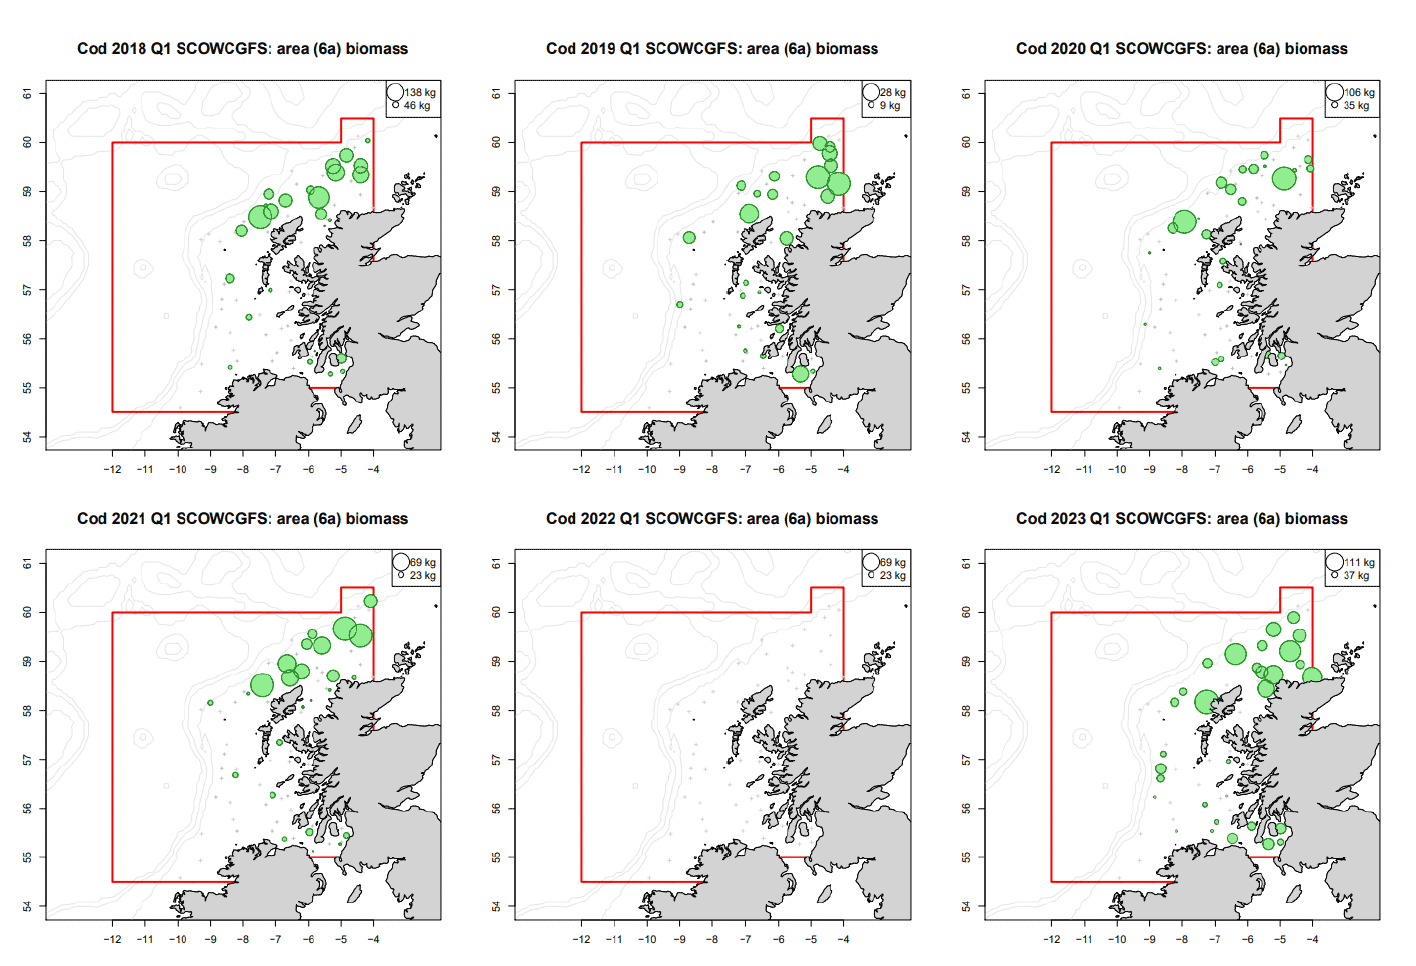 Distribution map for survey cod biomass in Quarter 1 in the West of Scotland (area 6a). There are 6 bubble plots one per year (2018-2023). The plots indicate larger biomass bubbles in the north of 6a. There are no bubbles in 2022 when the survey was cancelled.